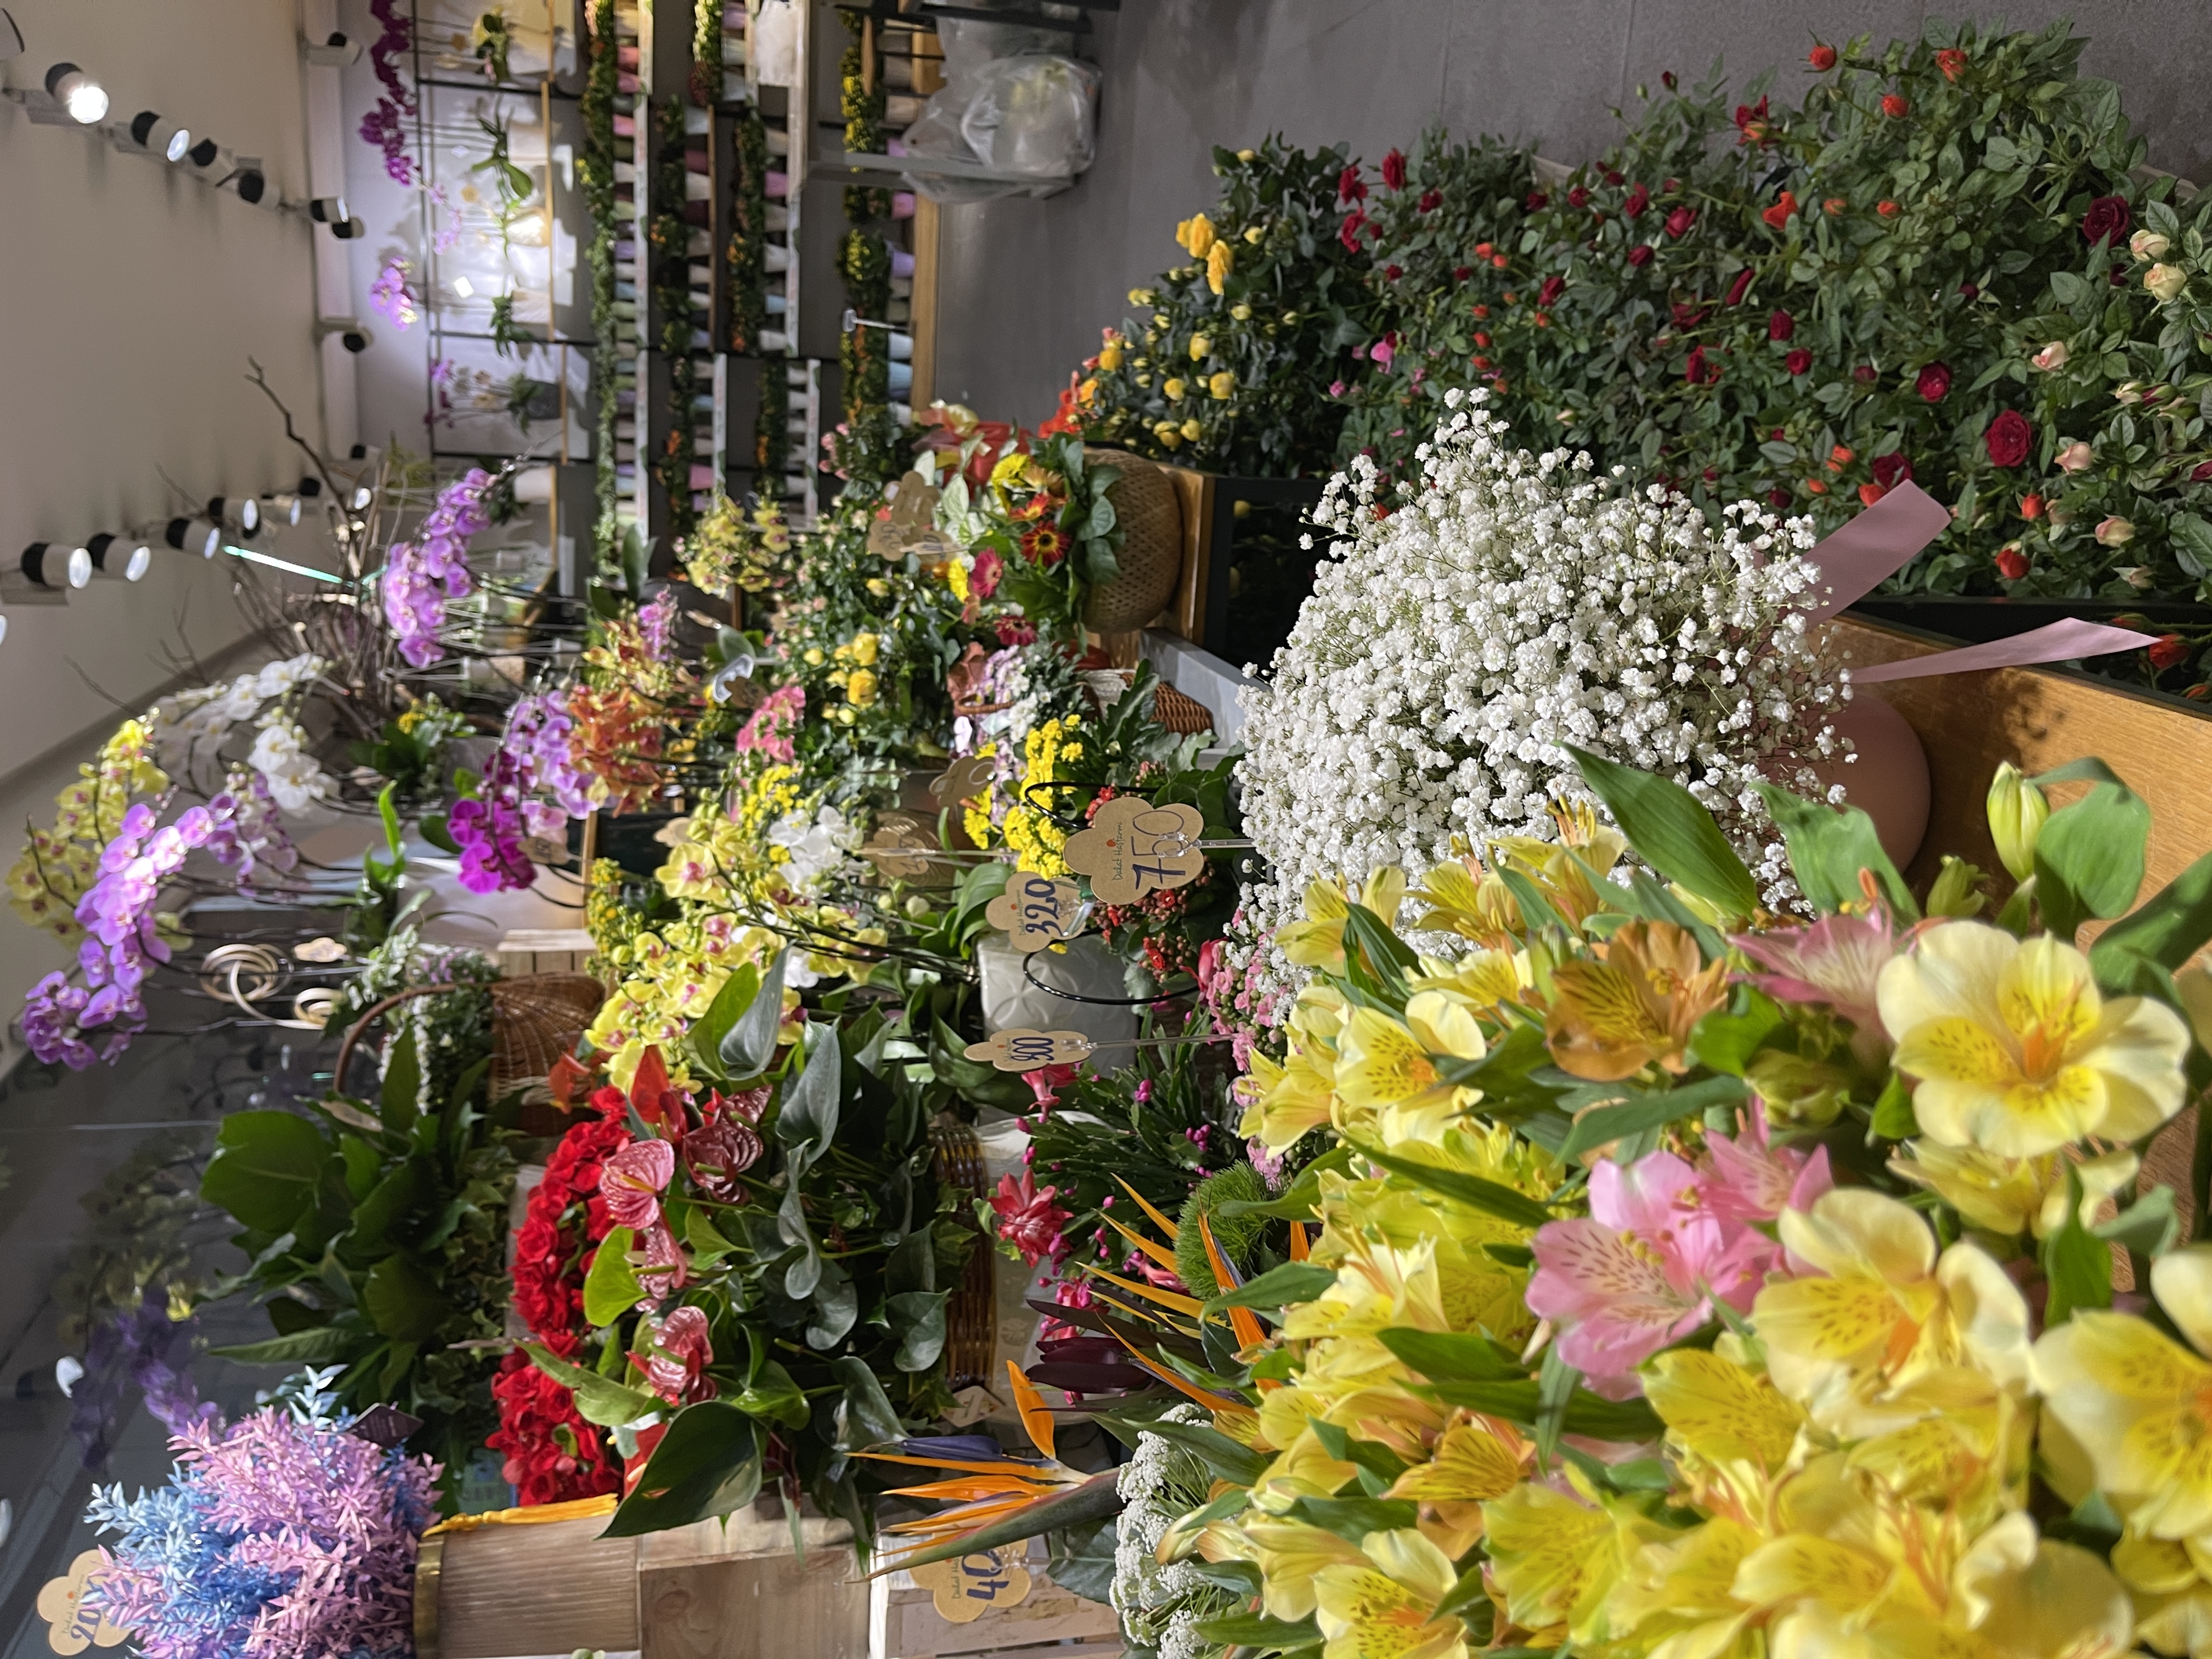 Flowers are displayed at a shop in Tan Binh District, Ho Chi Minh City. Photo: Dong Nguyen / Tuoi Tre News